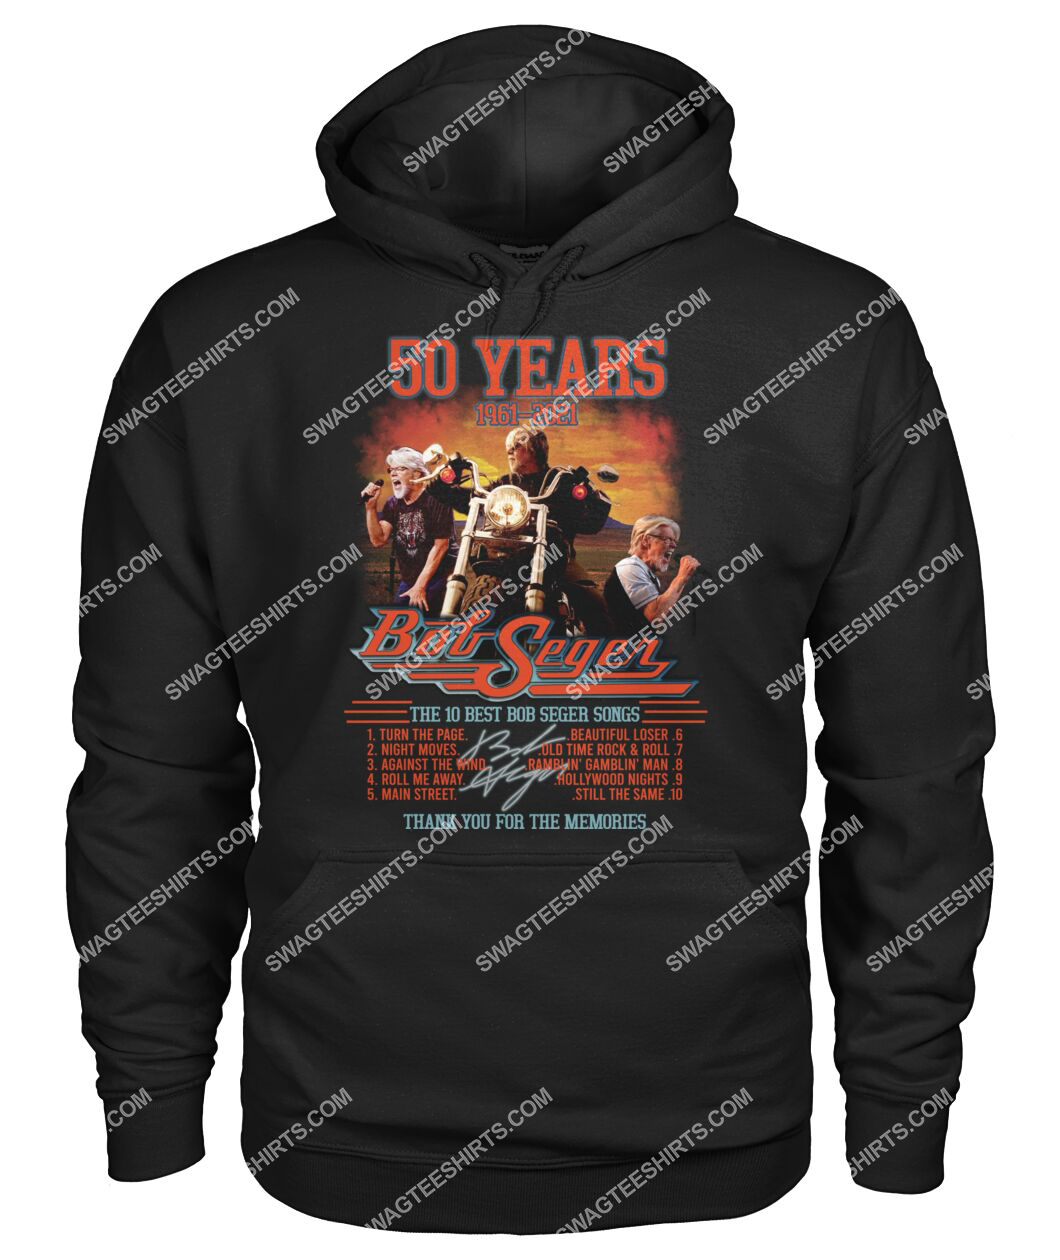 bob saget 50 years thank you for memories signature hoodie 1